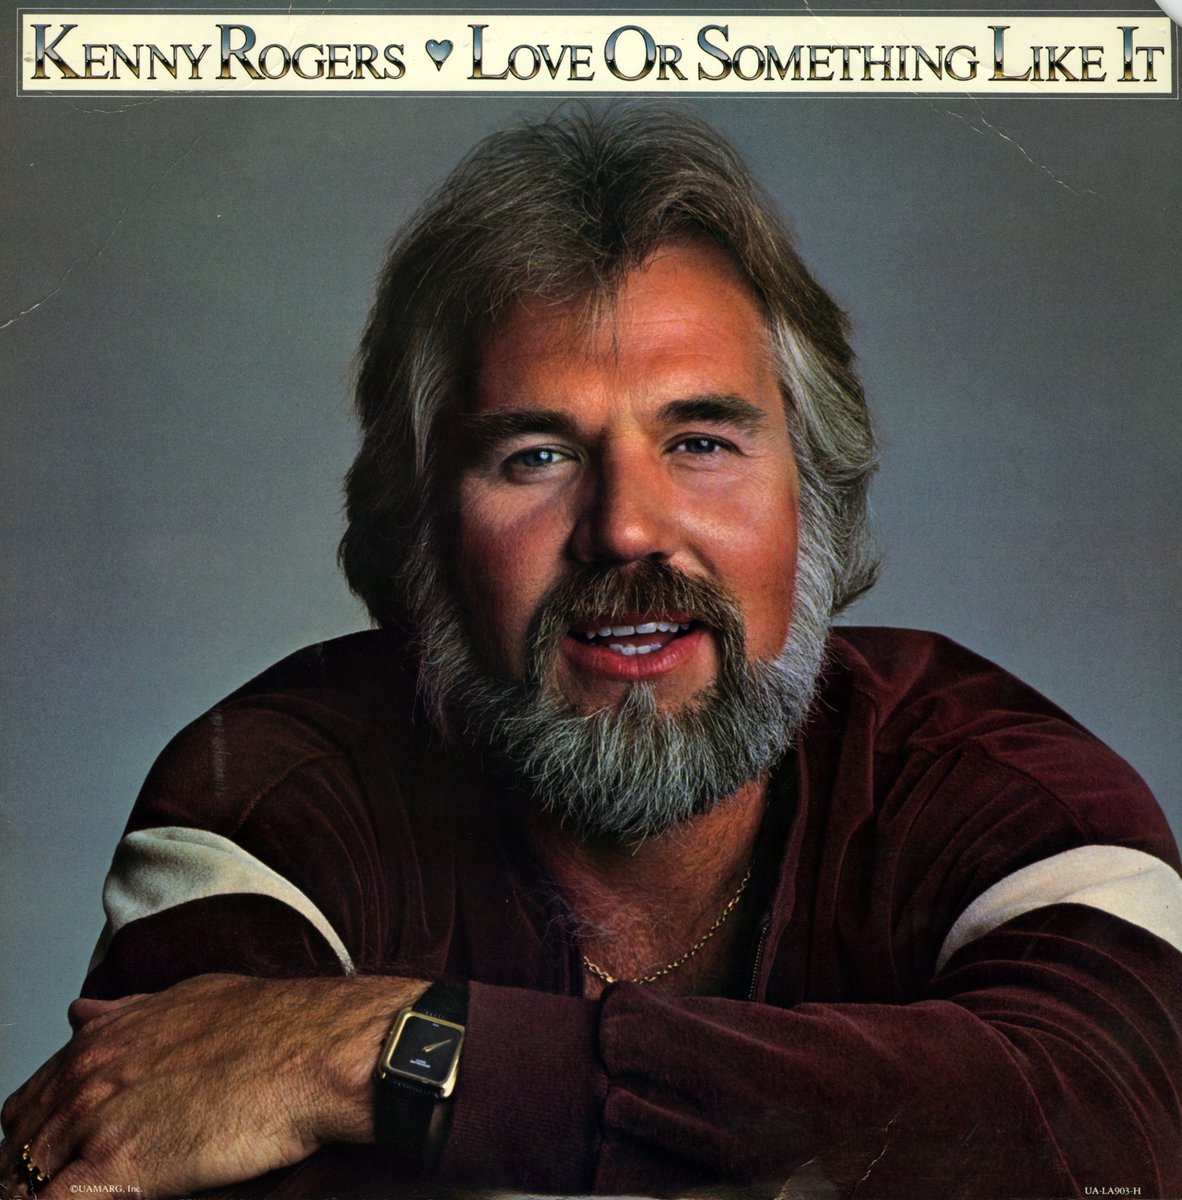 This week in 1978, Kenny Rogers released 'Love Or Something Like It'—the title track from his fourth solo album. Written by Kenny with Steve Glassmeyer from Kenny's band, Bloodline, the song went to #1 on the Billboard US Hot Country Songs Chart. -Team KR